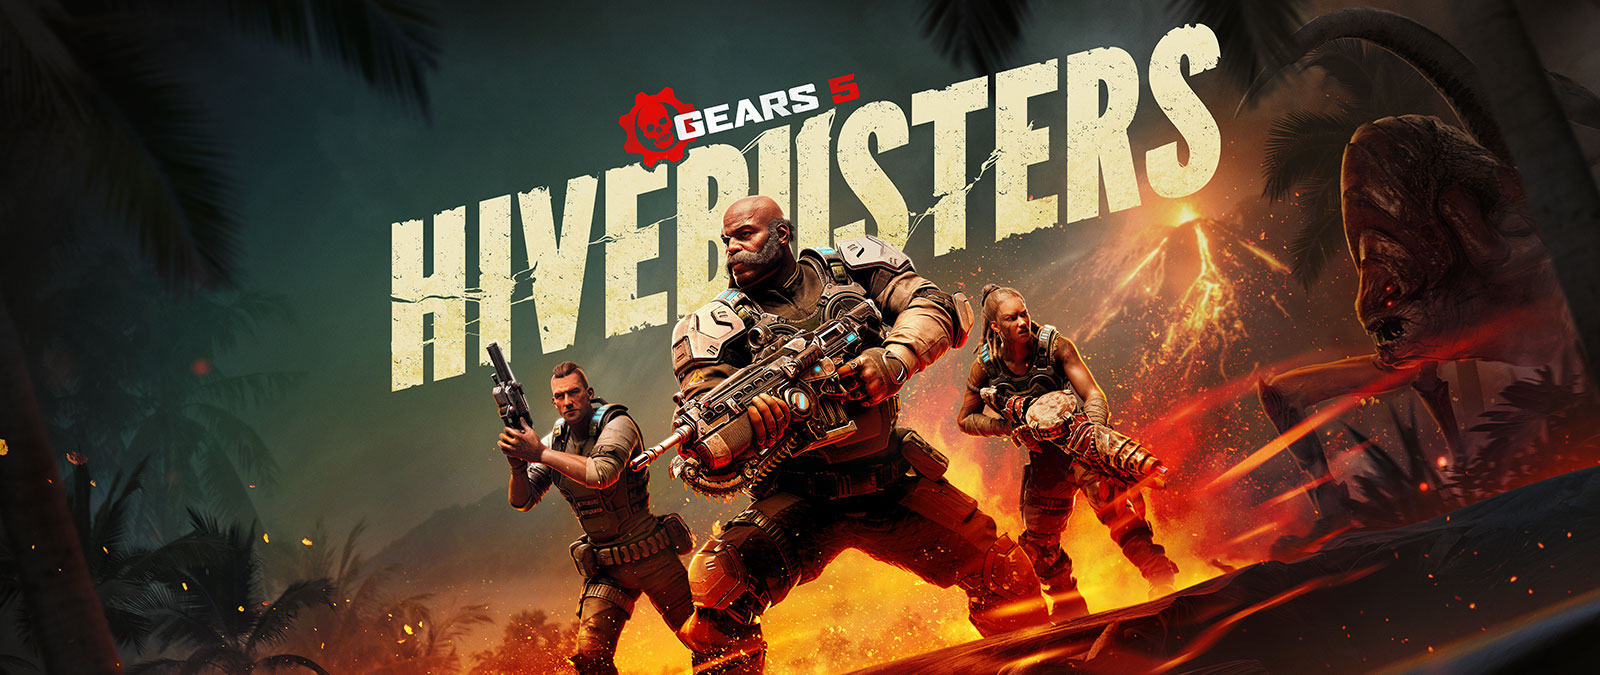 Gears 5 Hivebusters, three characters from Gears 5 with weapons in front of a volcano